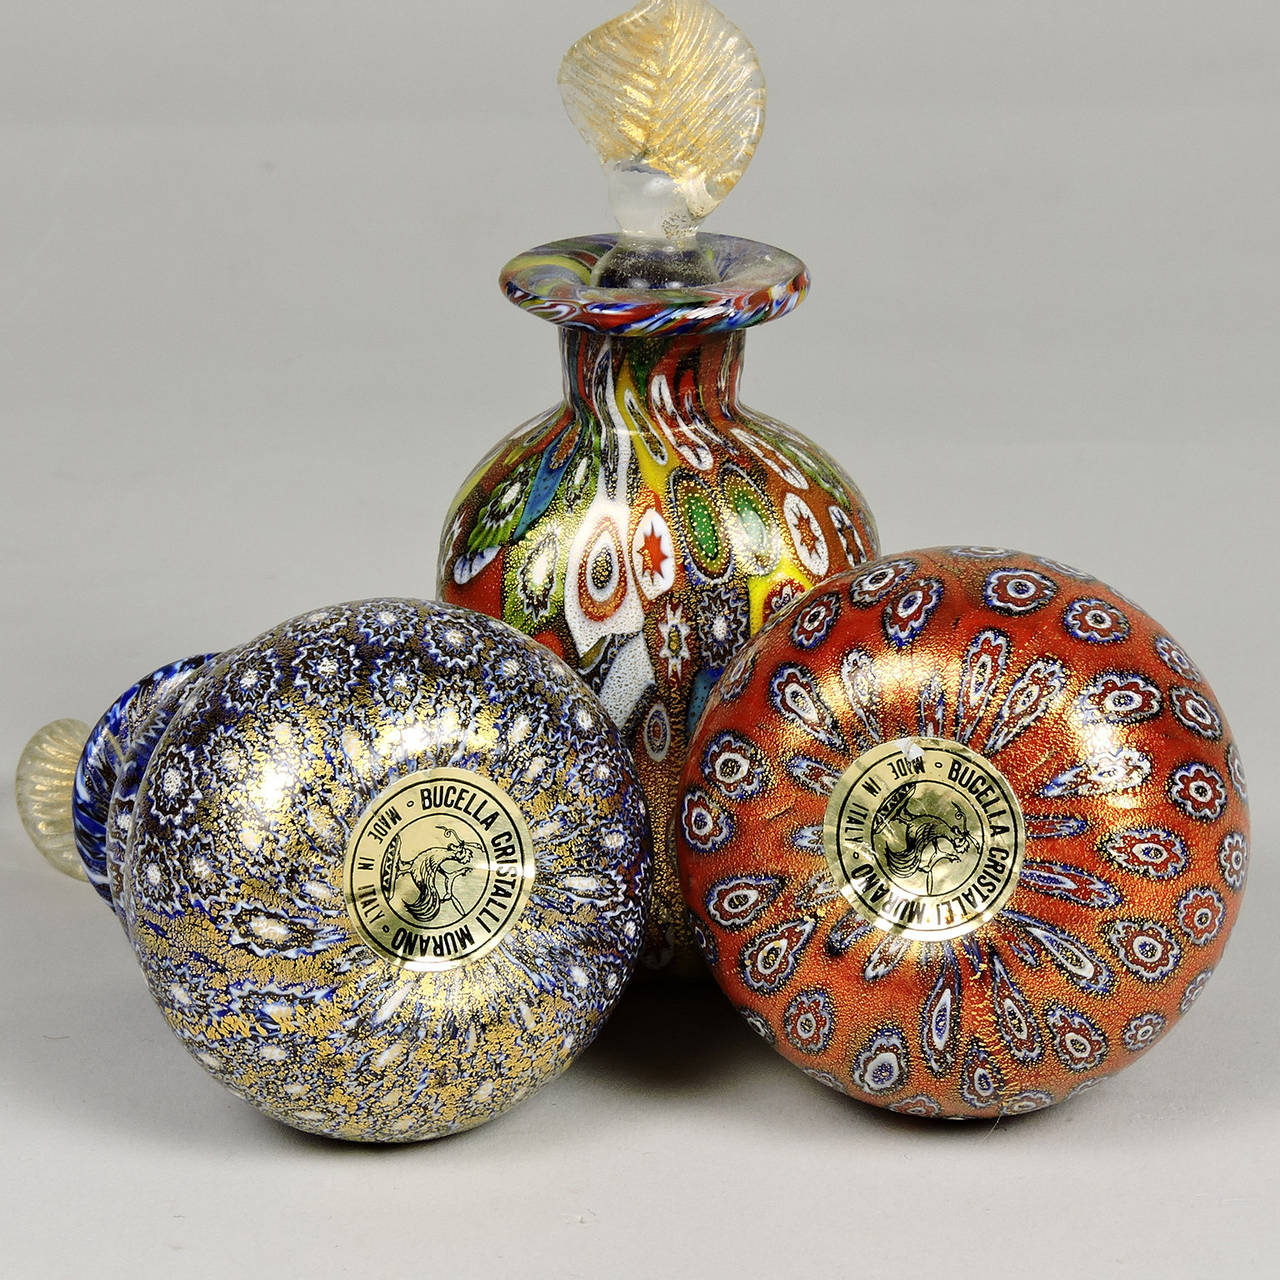 Three vintage Bucella Cristalli millefiori gold aventurine Murano glass perfume bottles. Two with paper labels. Height of tallest: 4 1/2 inches.